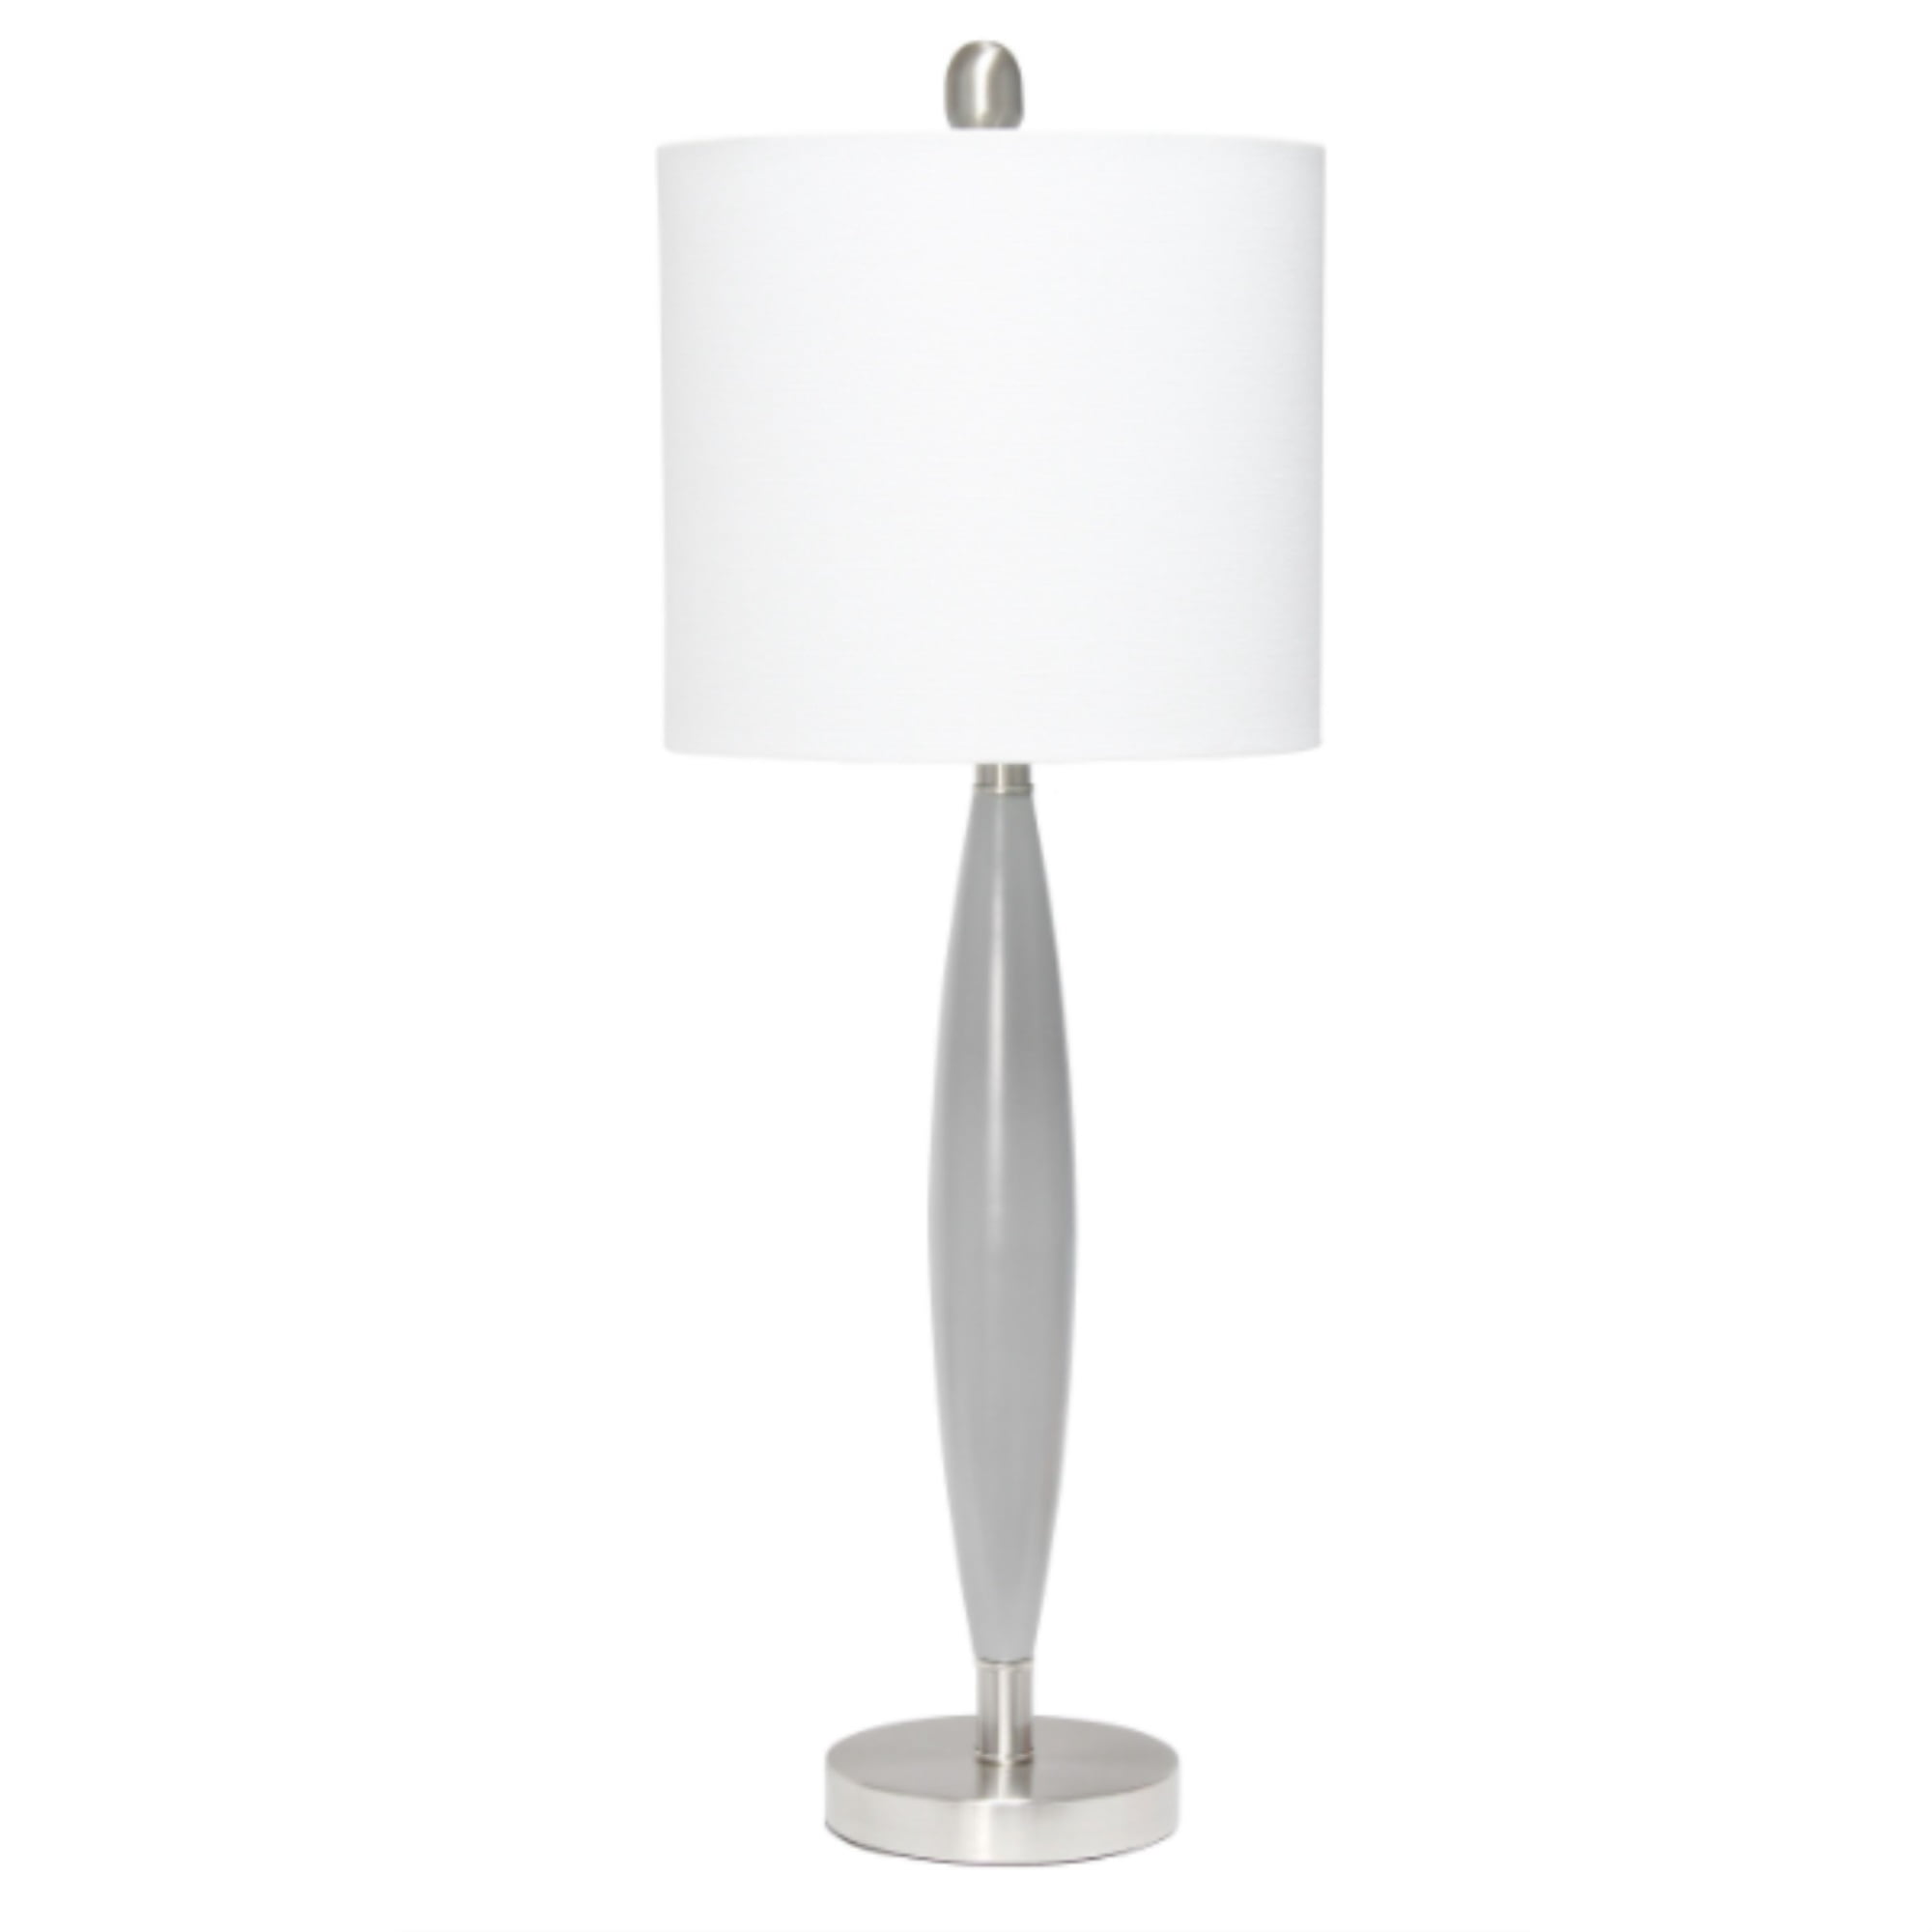  Lalia Home Stylus Table Lamp with White Fabric Shade, Gray